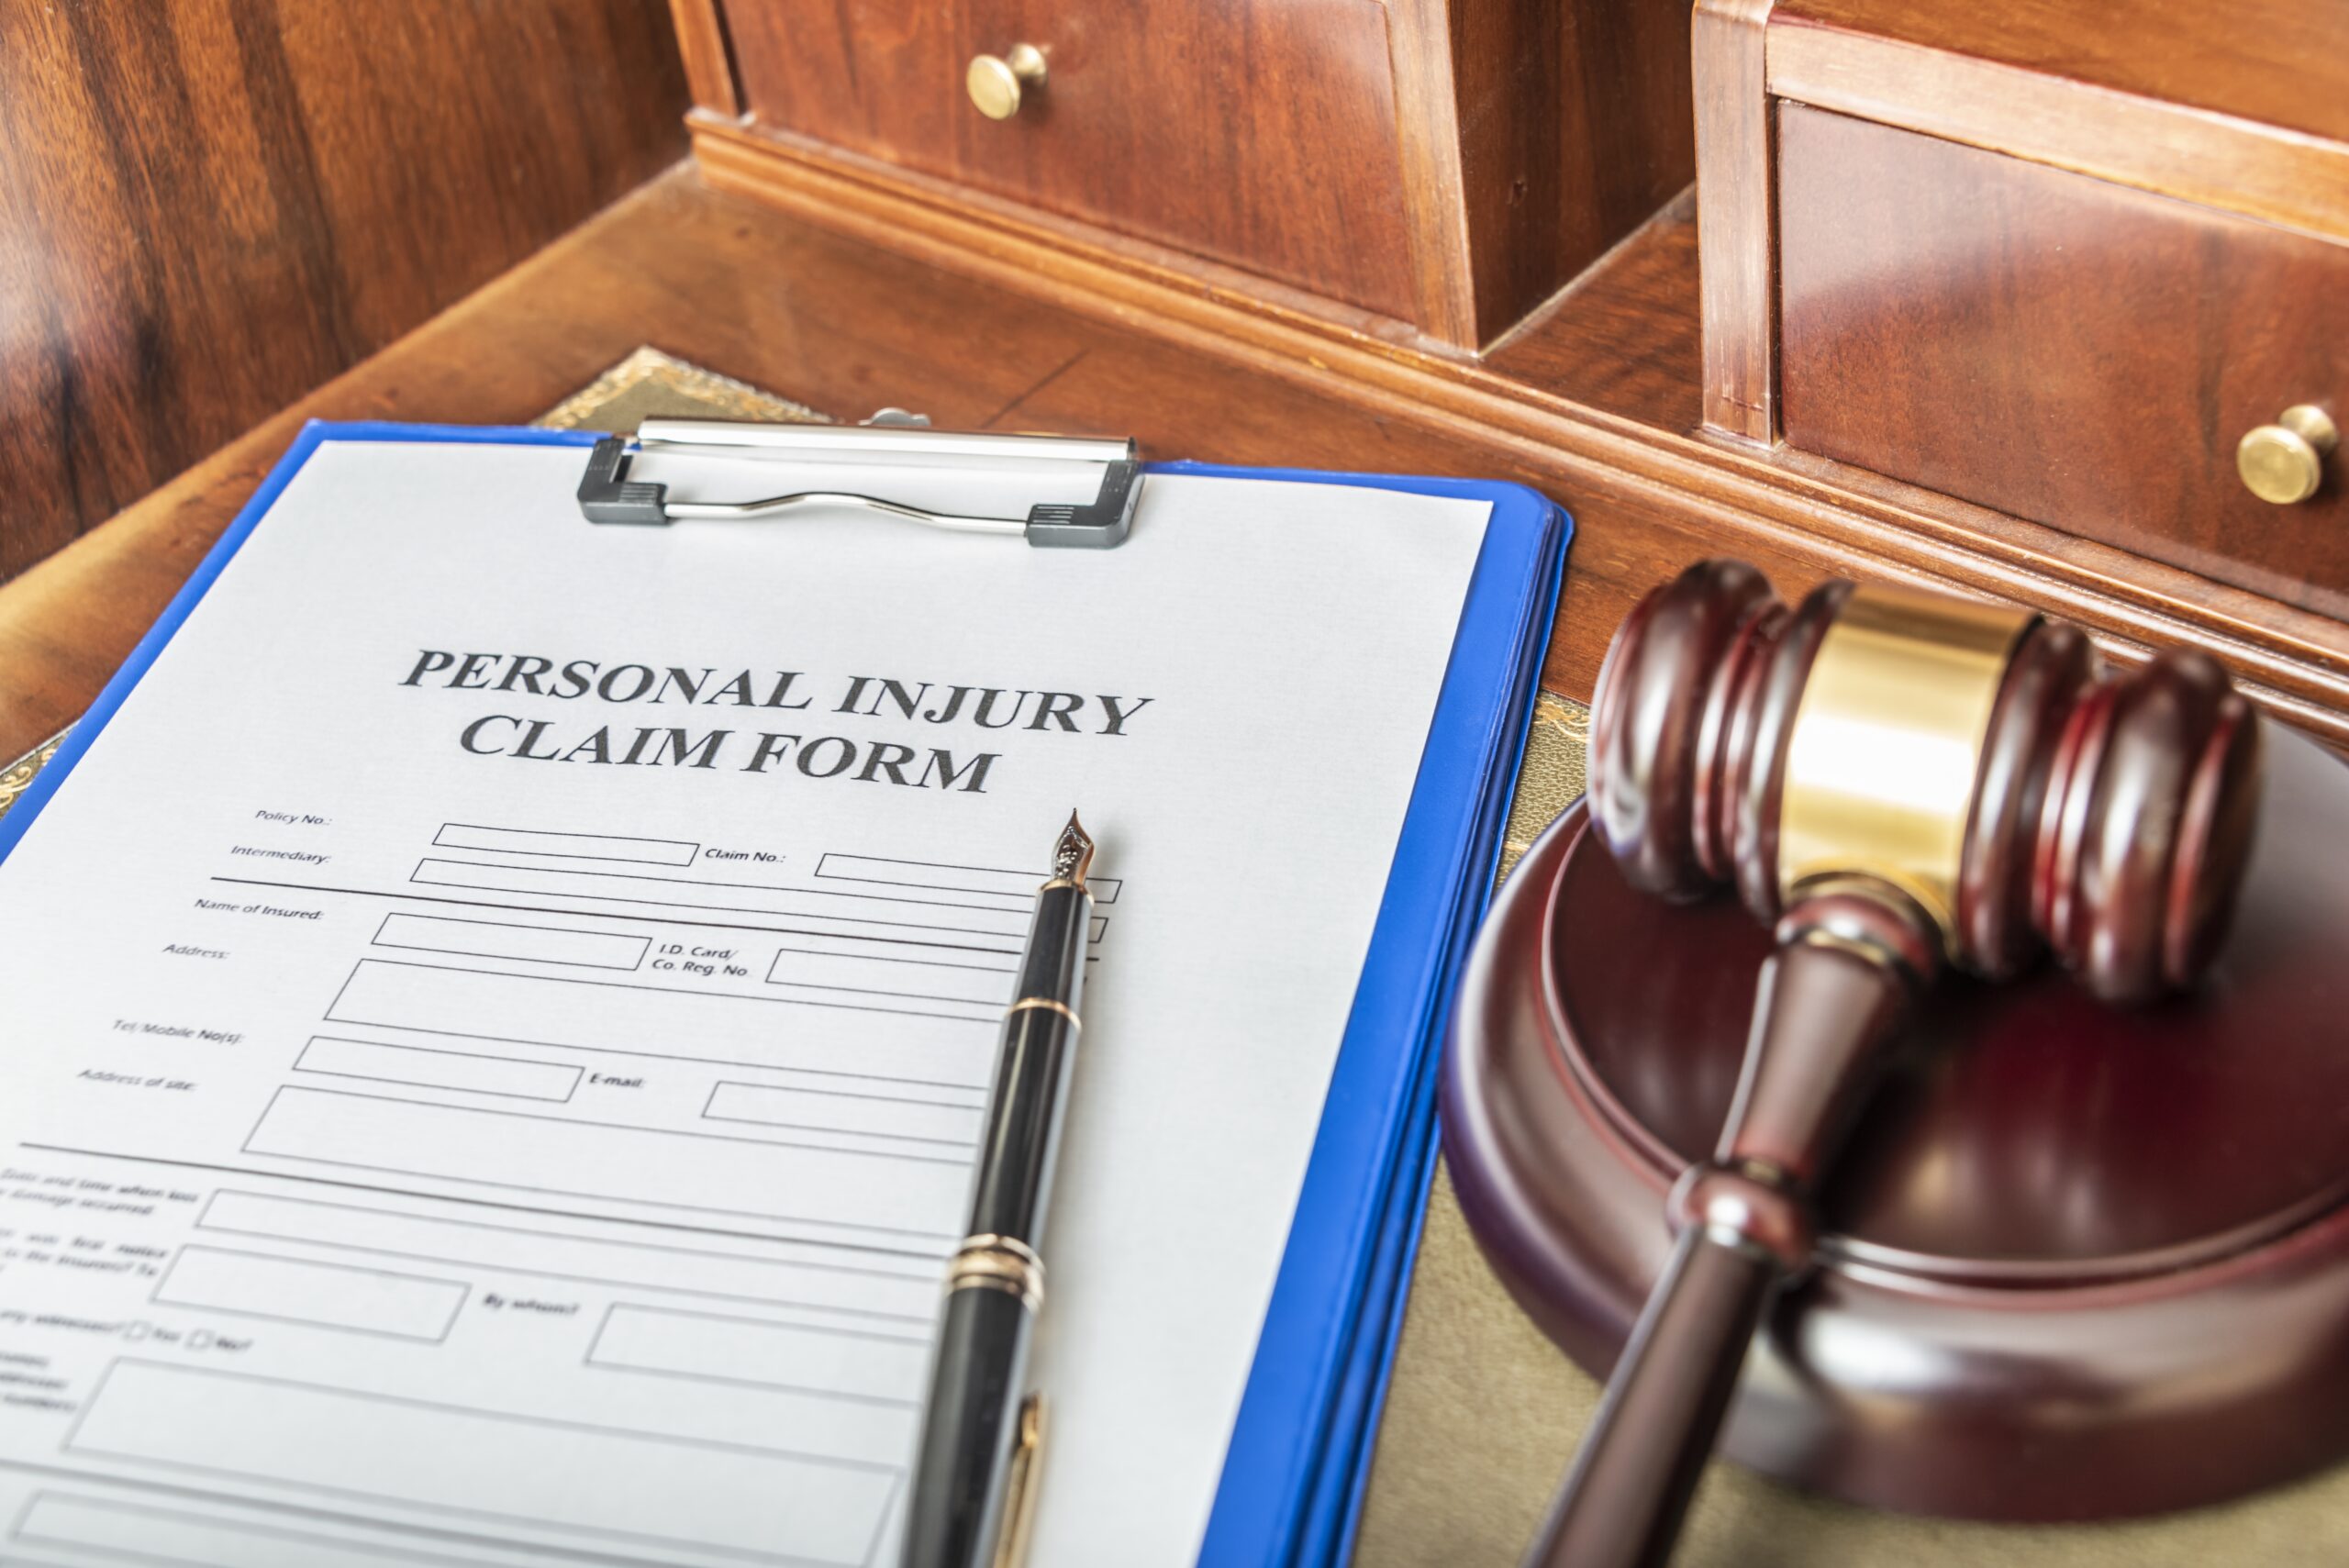 A personal injury claim form next to a judge's gavel.